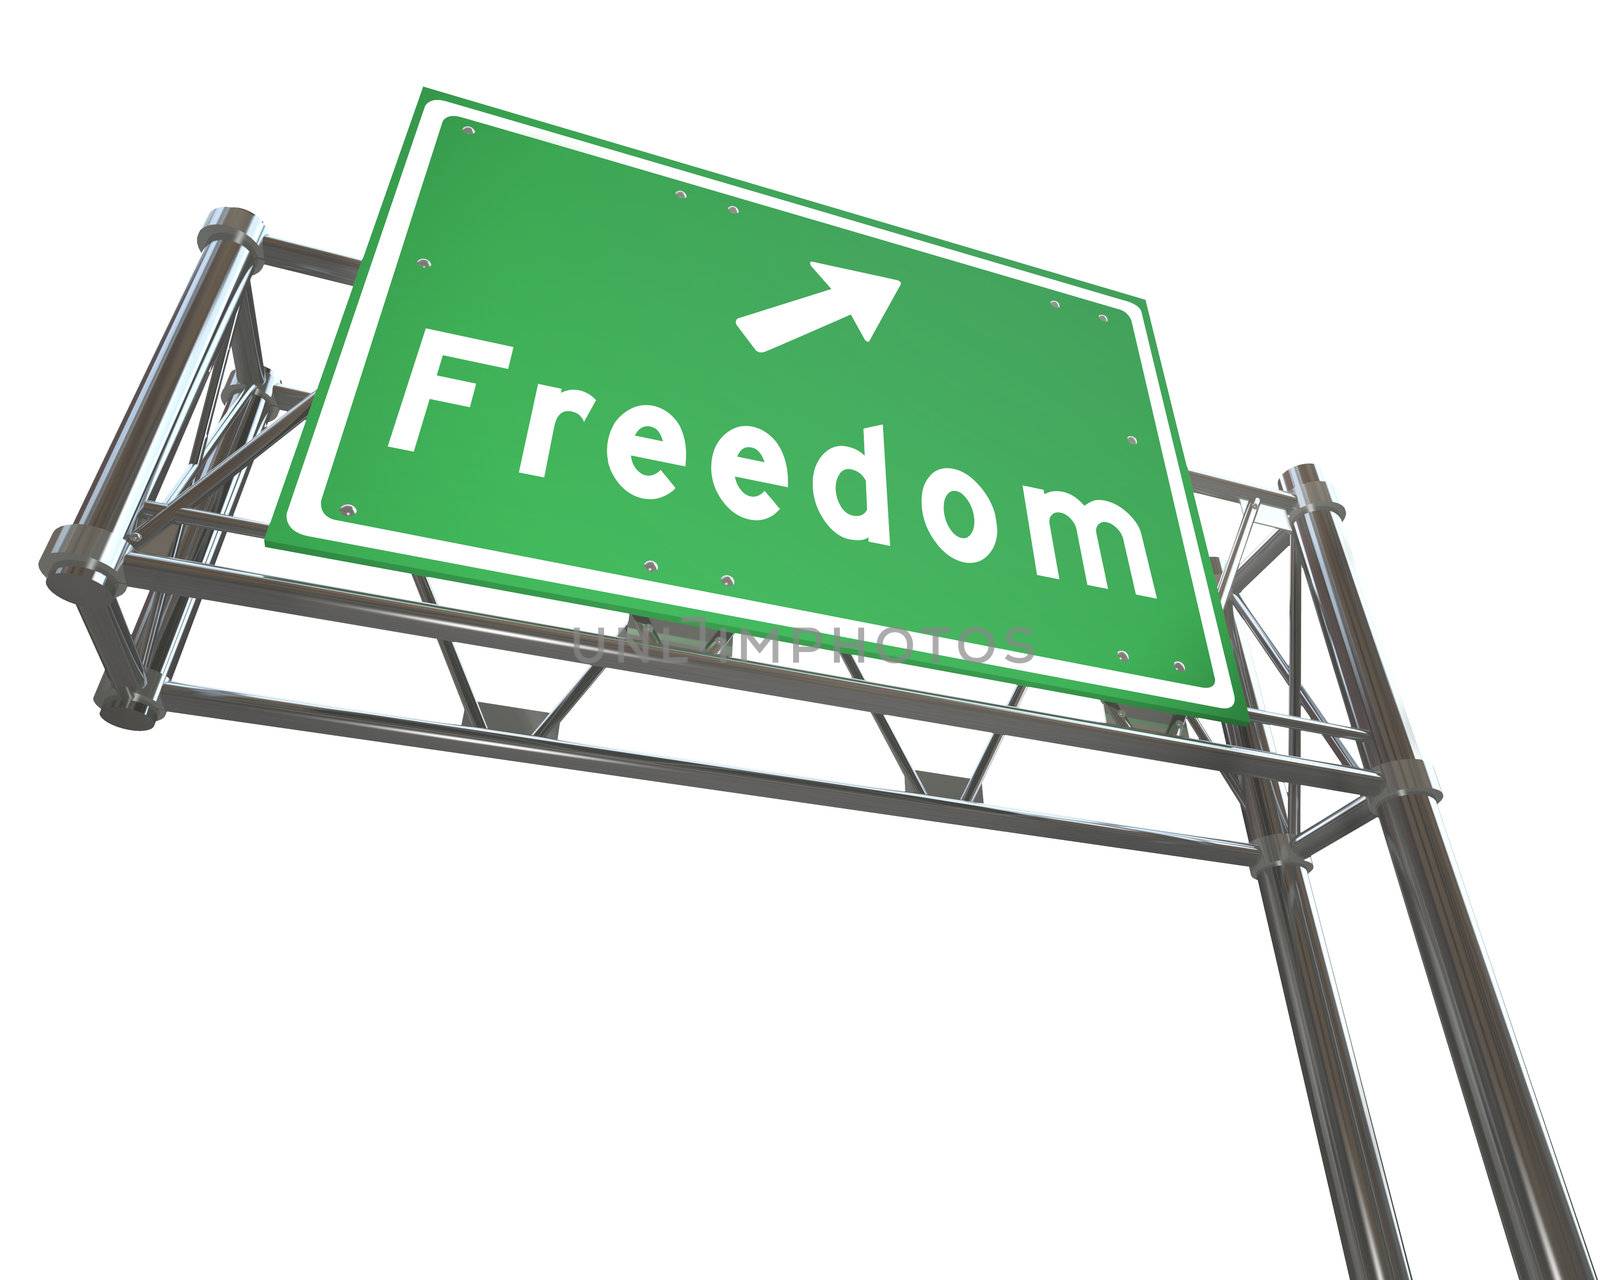 A green freeway sign with the word Freedom and an arrow pointing the way to a path of independence, liberty and autonomy